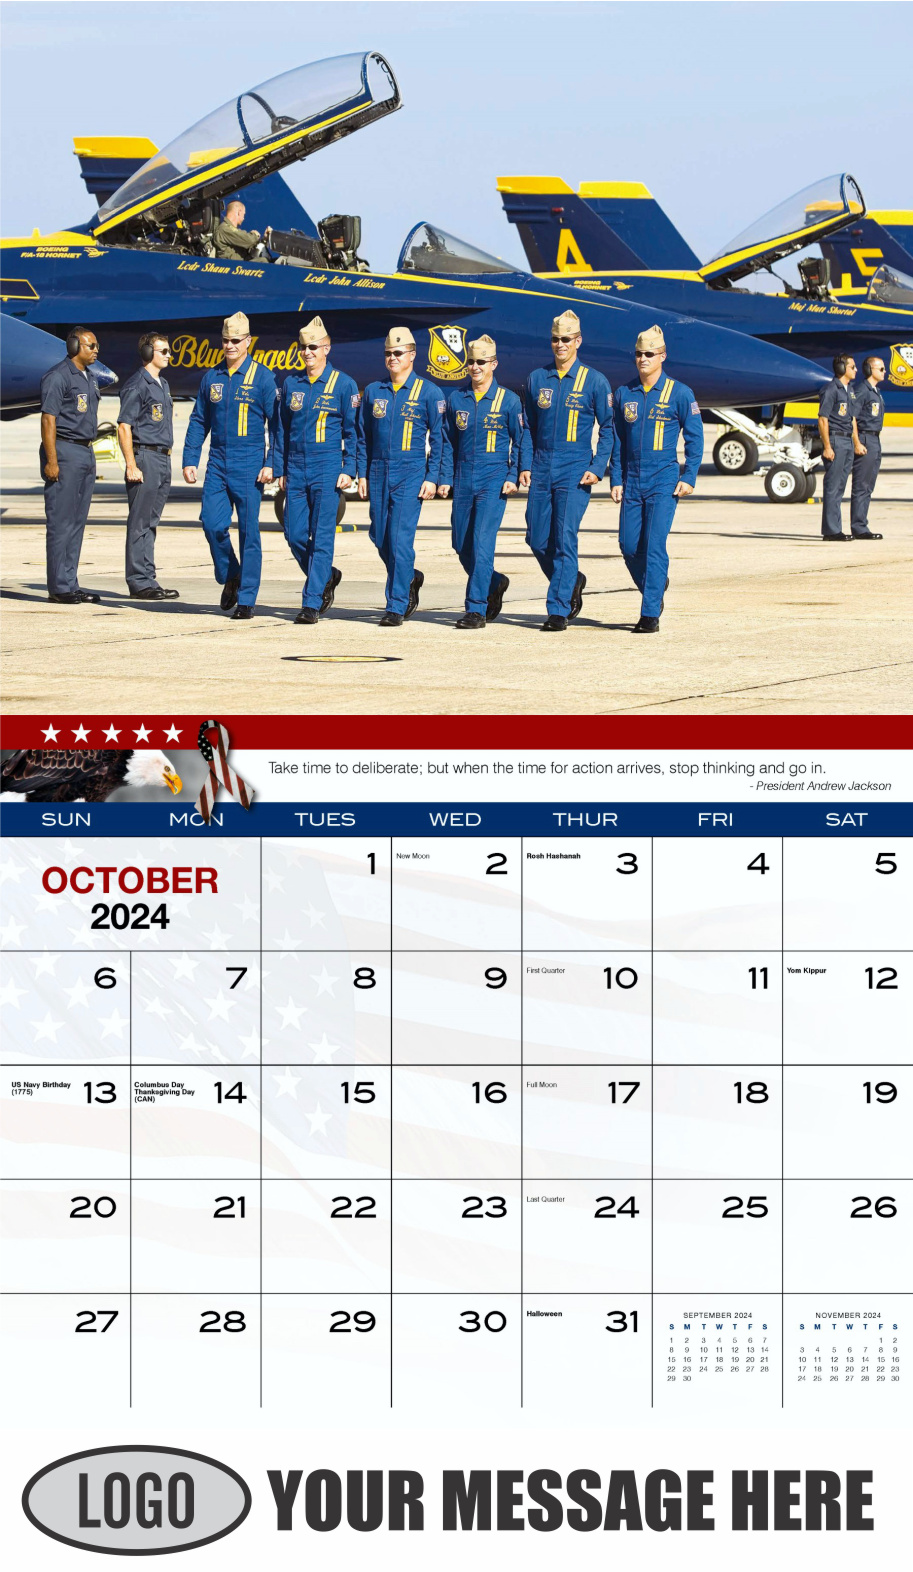 Home of the Brave 2024 USA Armed Forces Business Promo Calendar - October